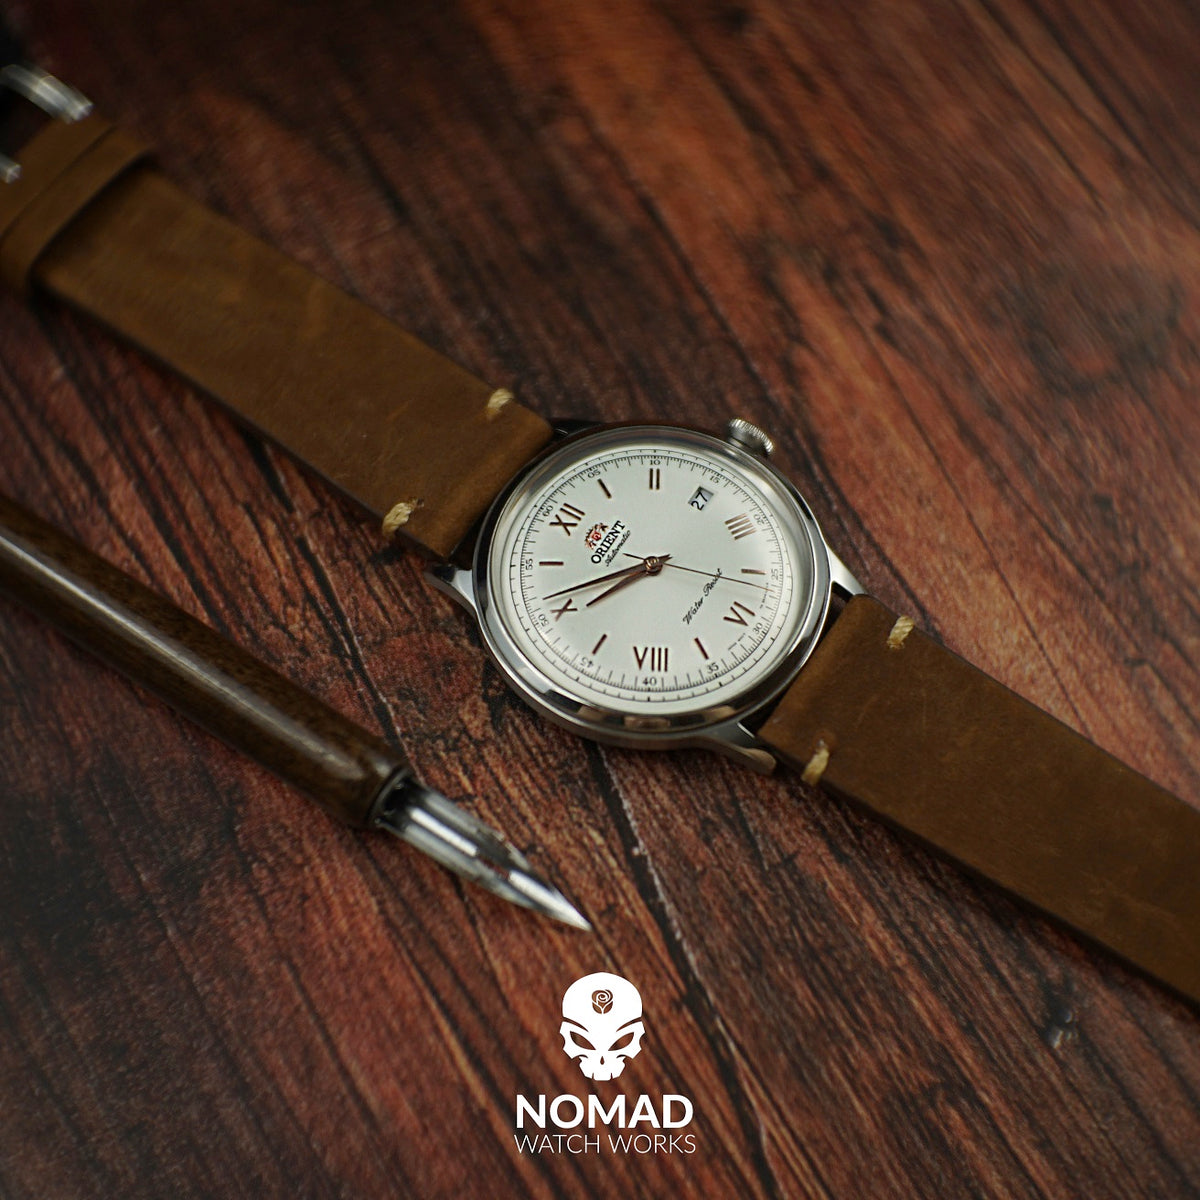 Premium Vintage Calf Leather Watch Strap in Rustic Tan (20mm) - Nomad Watch Works Malaysia